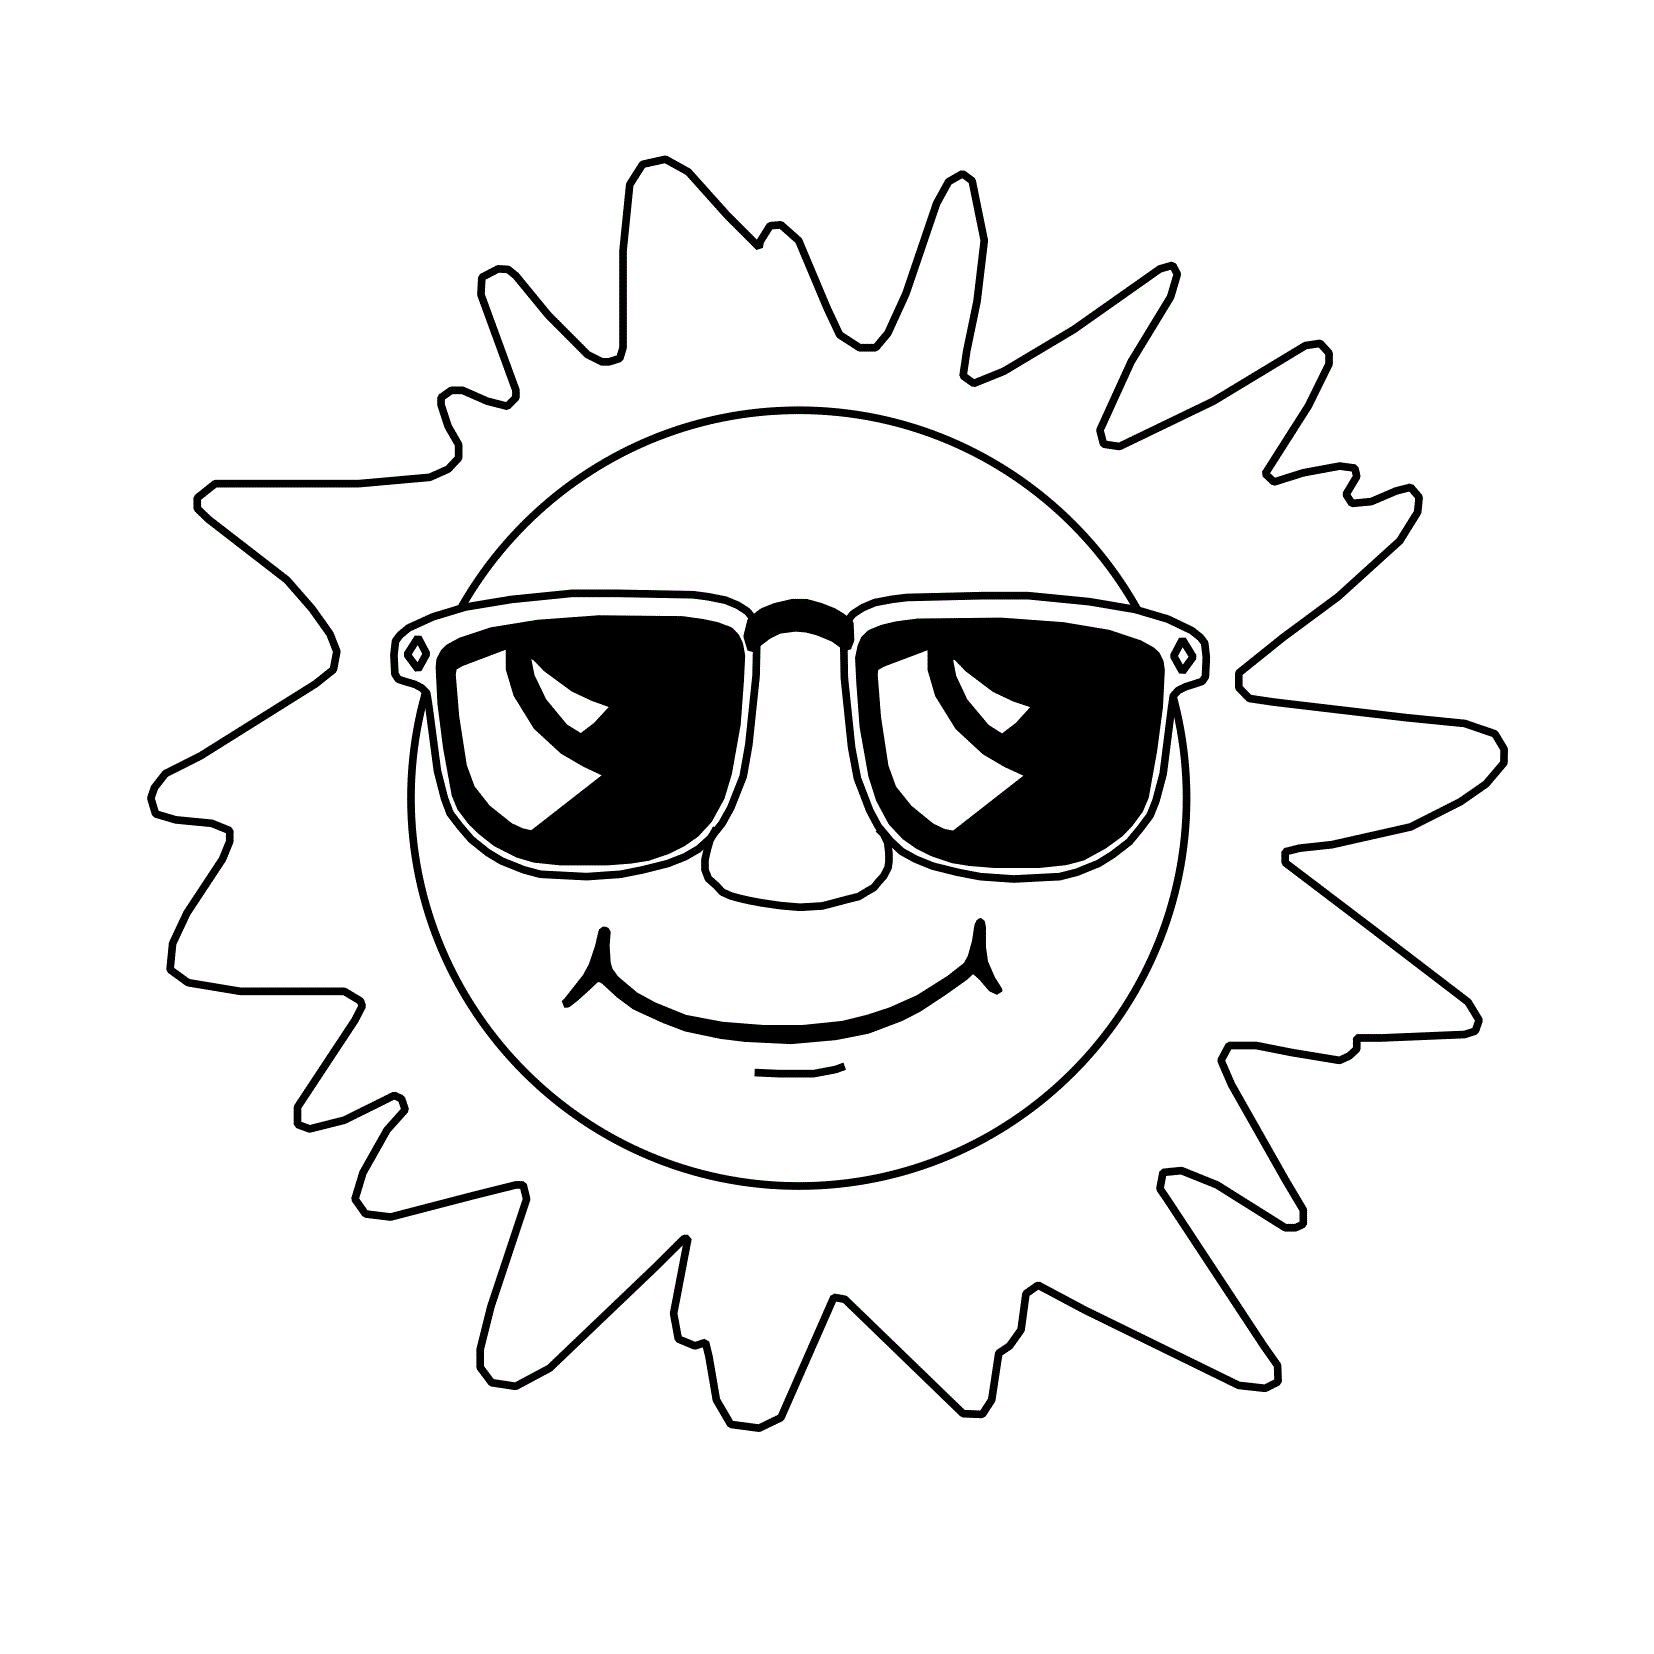 sun coloring pages free printable sun coloring pages for kids coloring pages sun 